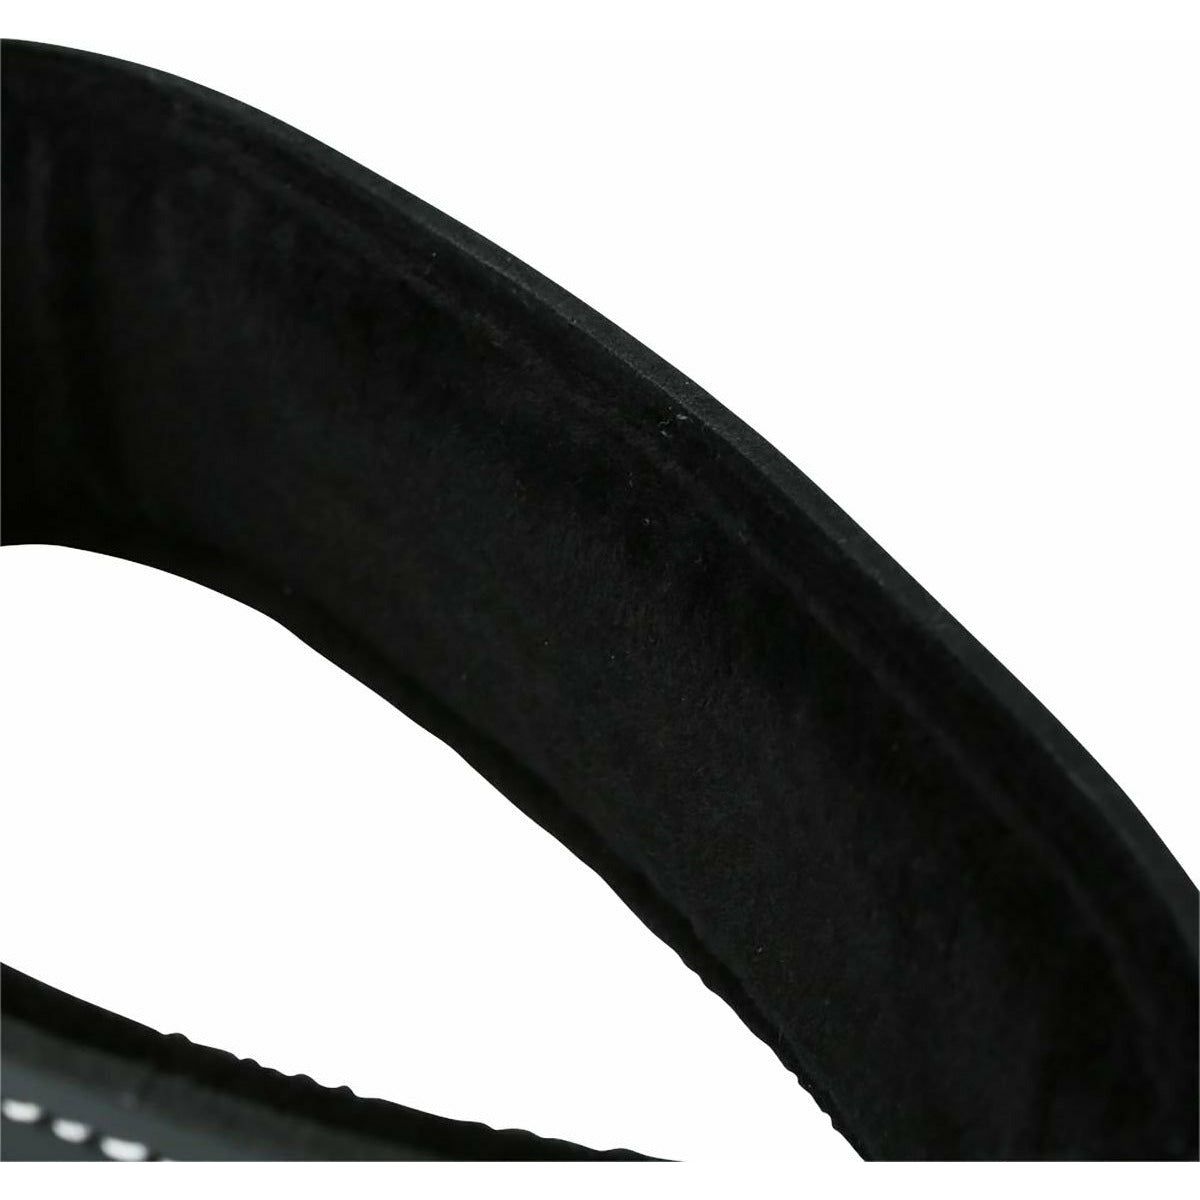 Sportsheets Edge - Lined Leather Collar